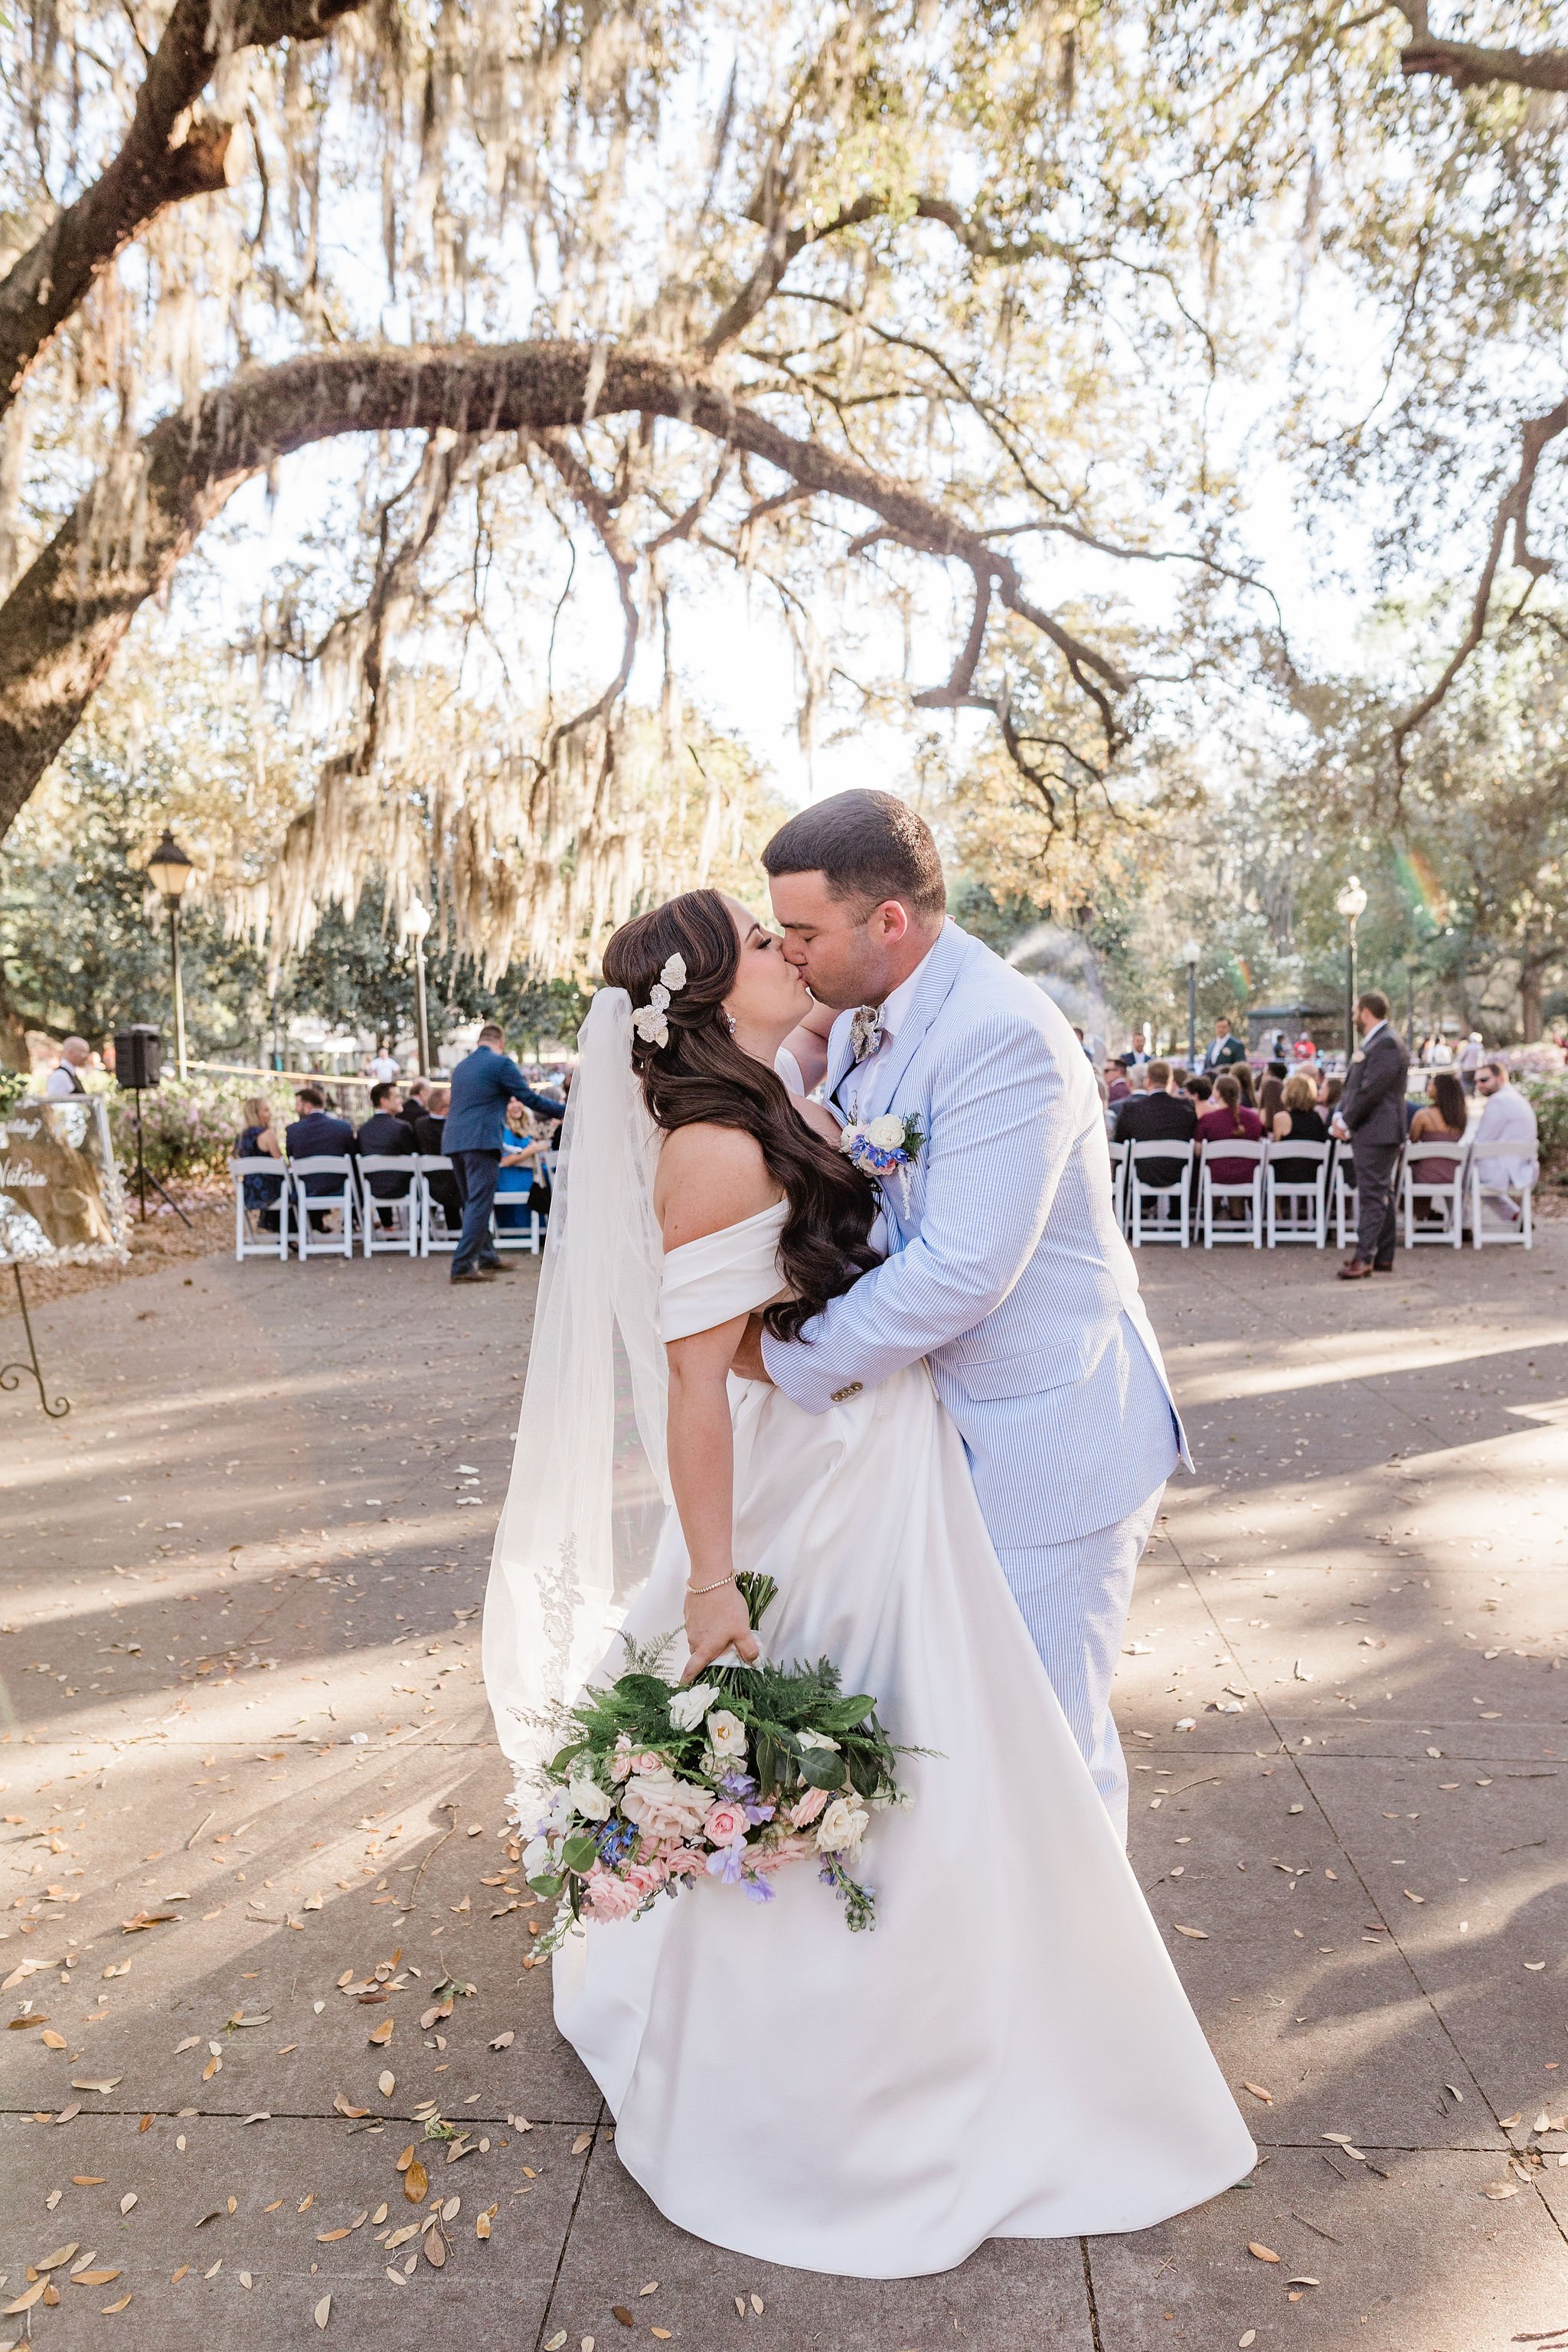 Victoria-and-stuarts-pastel-spring-wedding-at-the-forsyth-park-fountain-and-the-mansion-on-forsyth-in-savannah-georgia-planned-by-savannah-wedding-planner-and-savannah-wedding-florist-ivory-and-beau-16.JPG